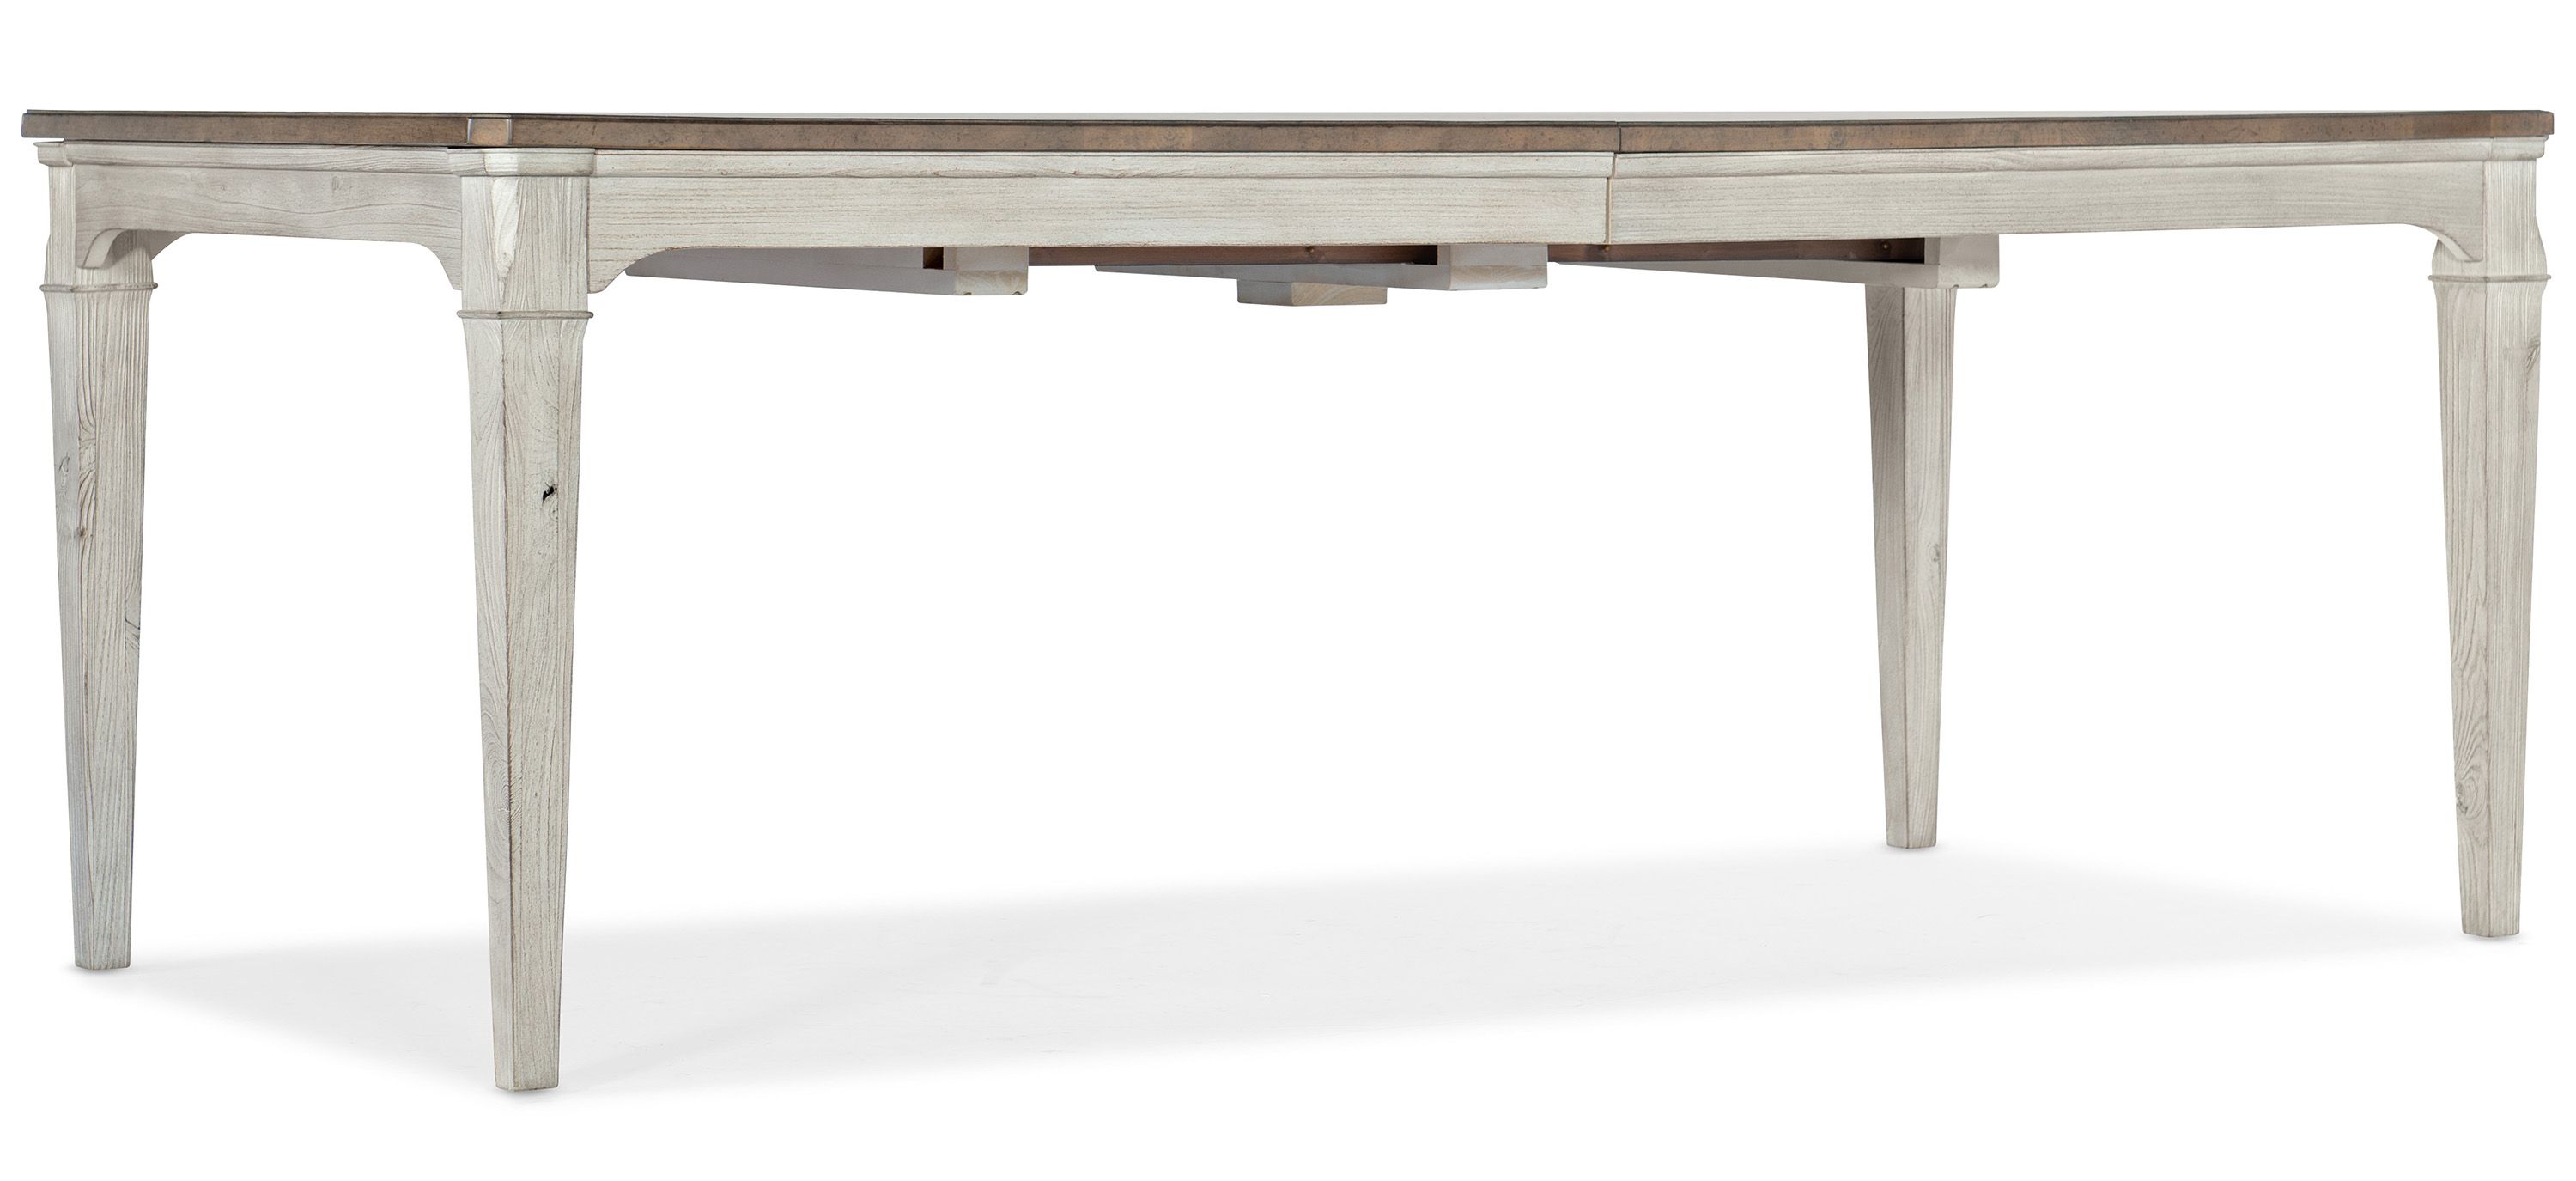 Montebello Rectangular Dining Table with Leaf